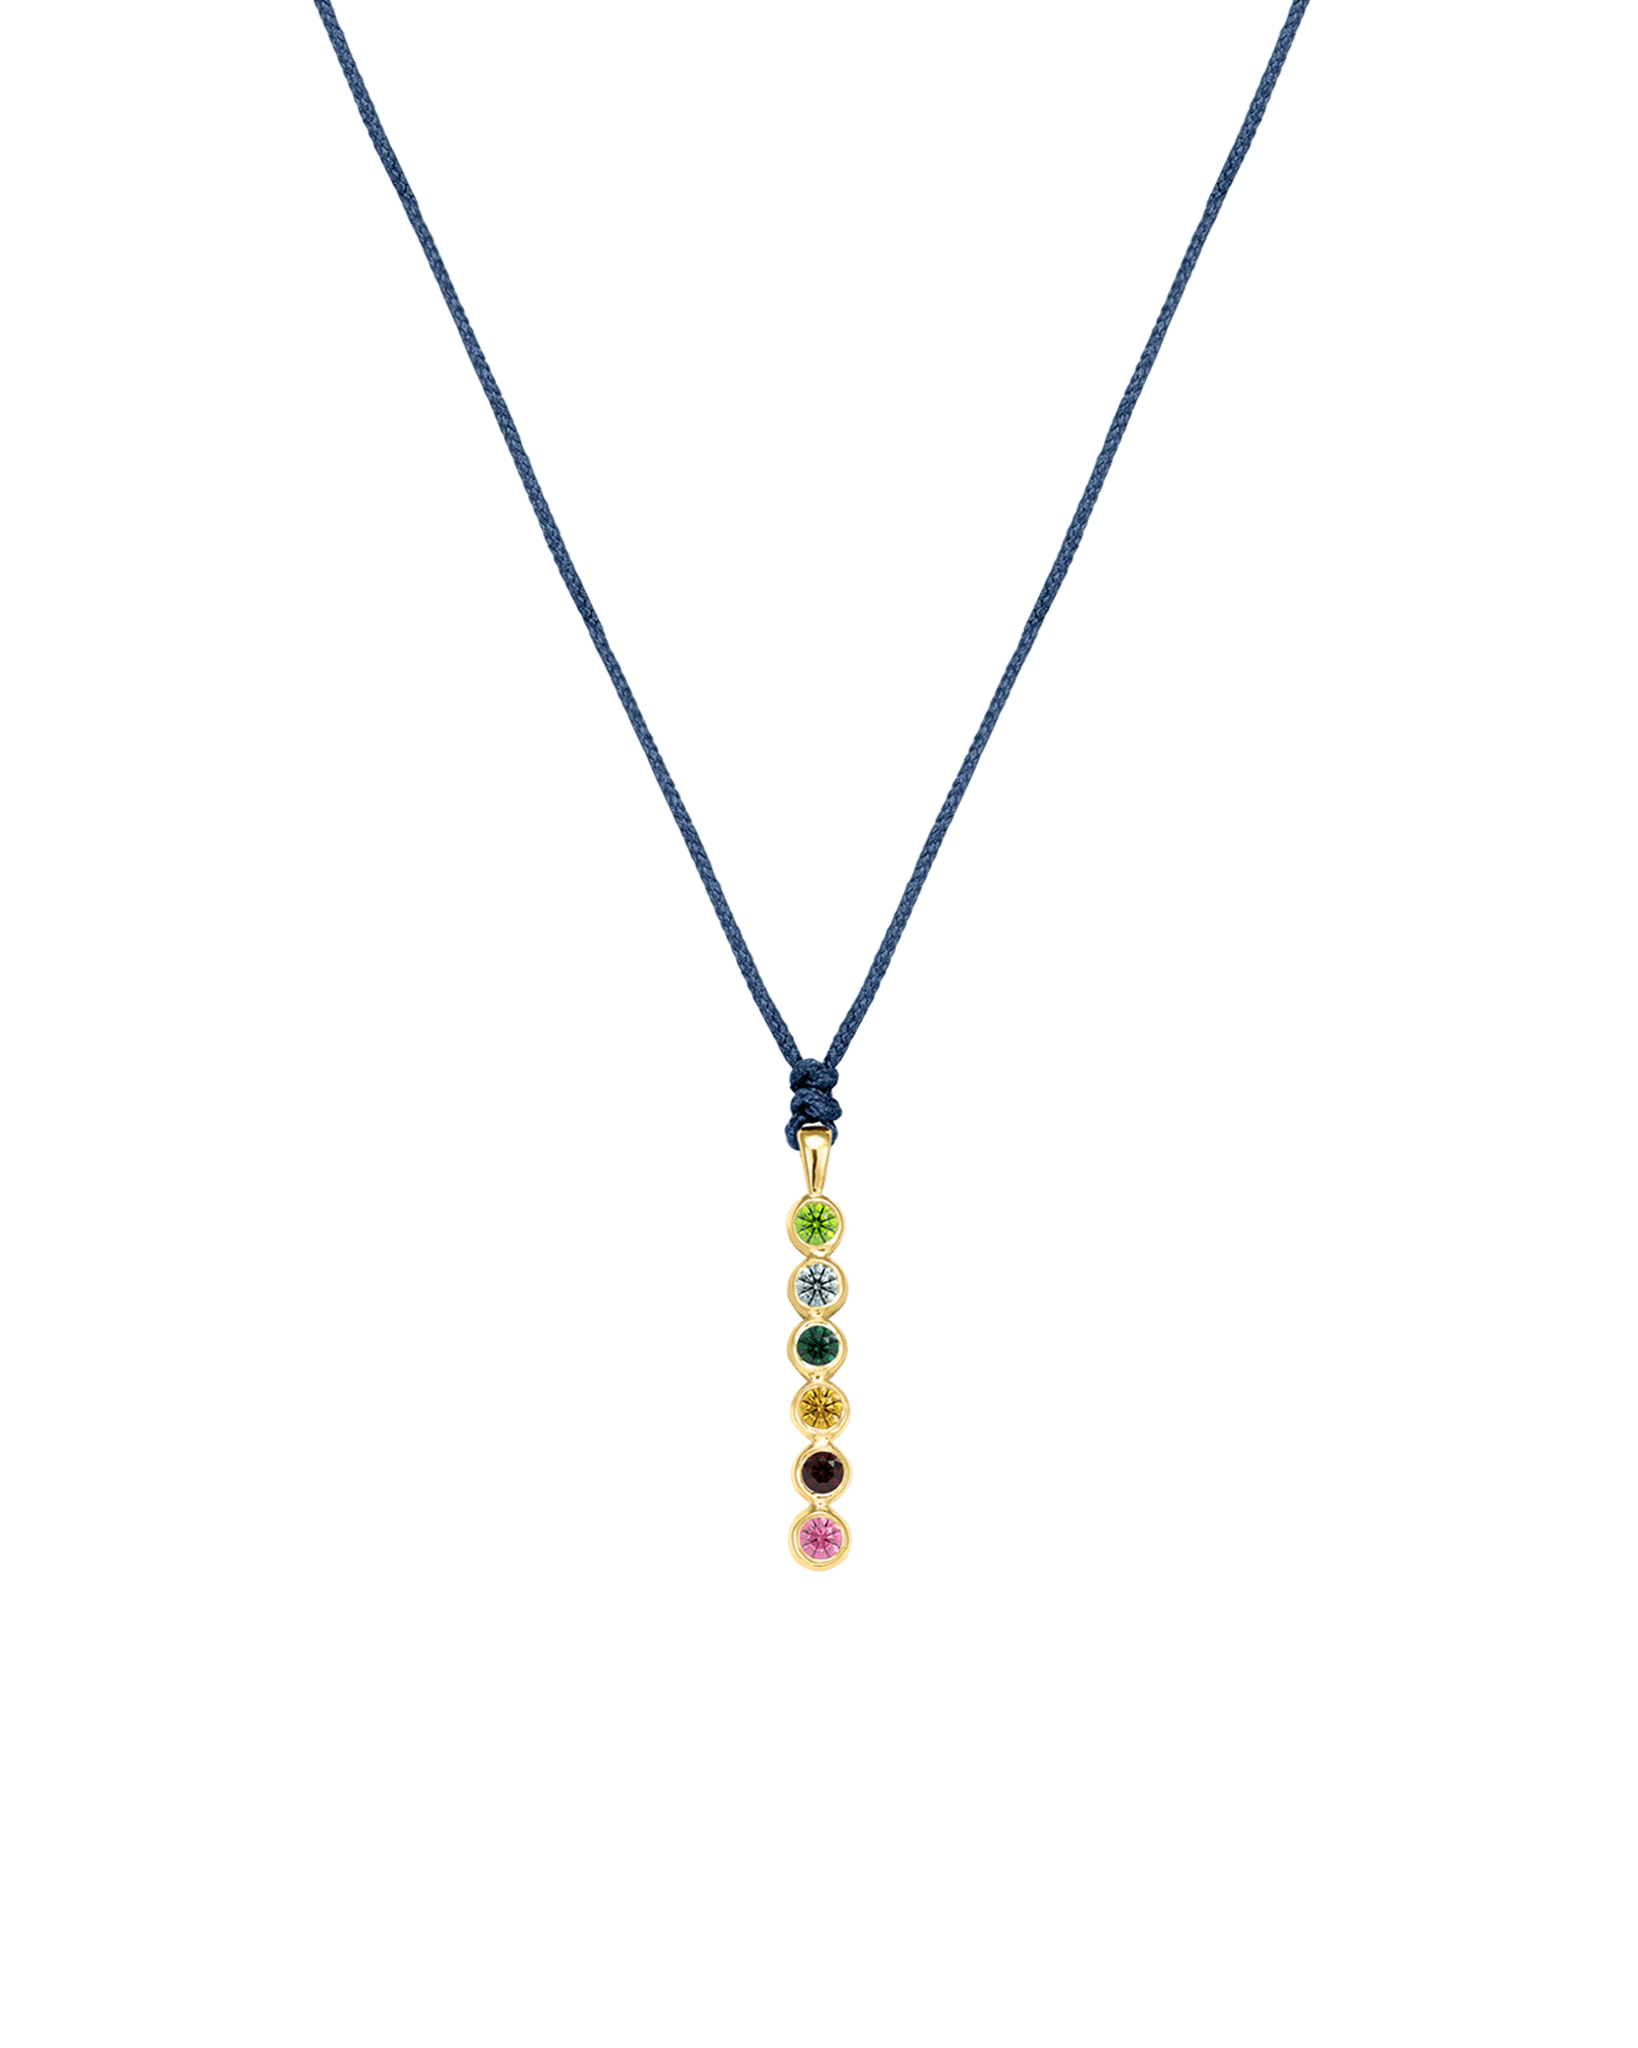 The Birthstones Bar Necklace - 14K Yellow Gold Necklaces 14K Solid Gold Indigo 2 